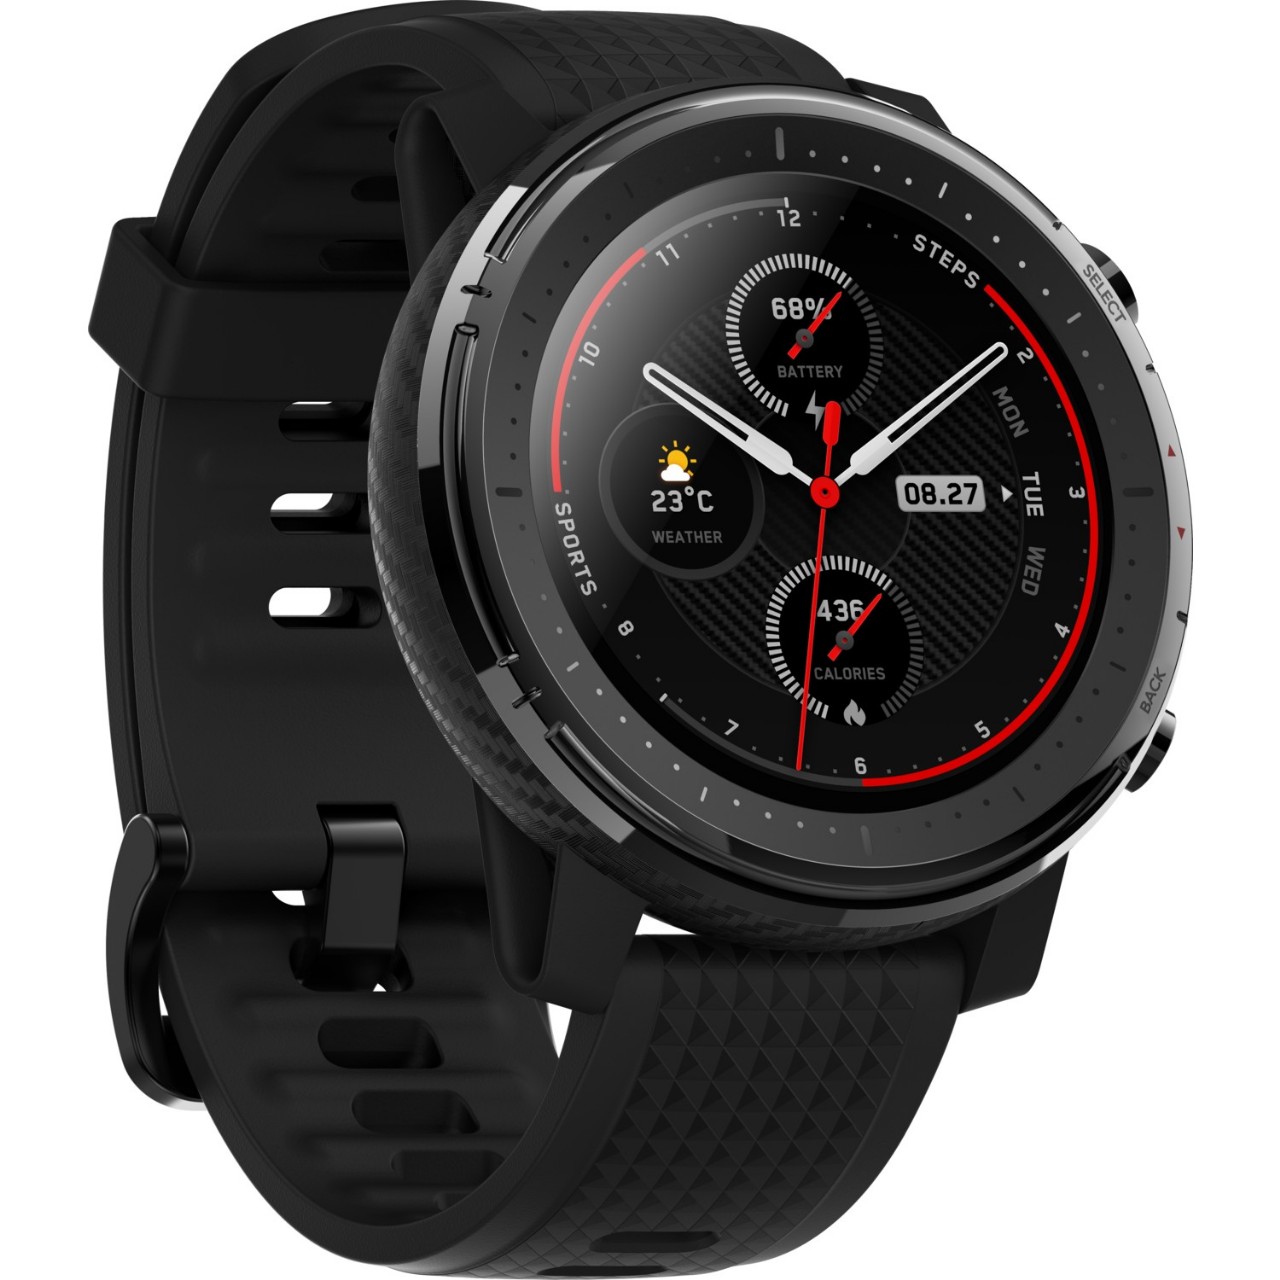 The Amazfit Stratos 3 has an estimated battery life